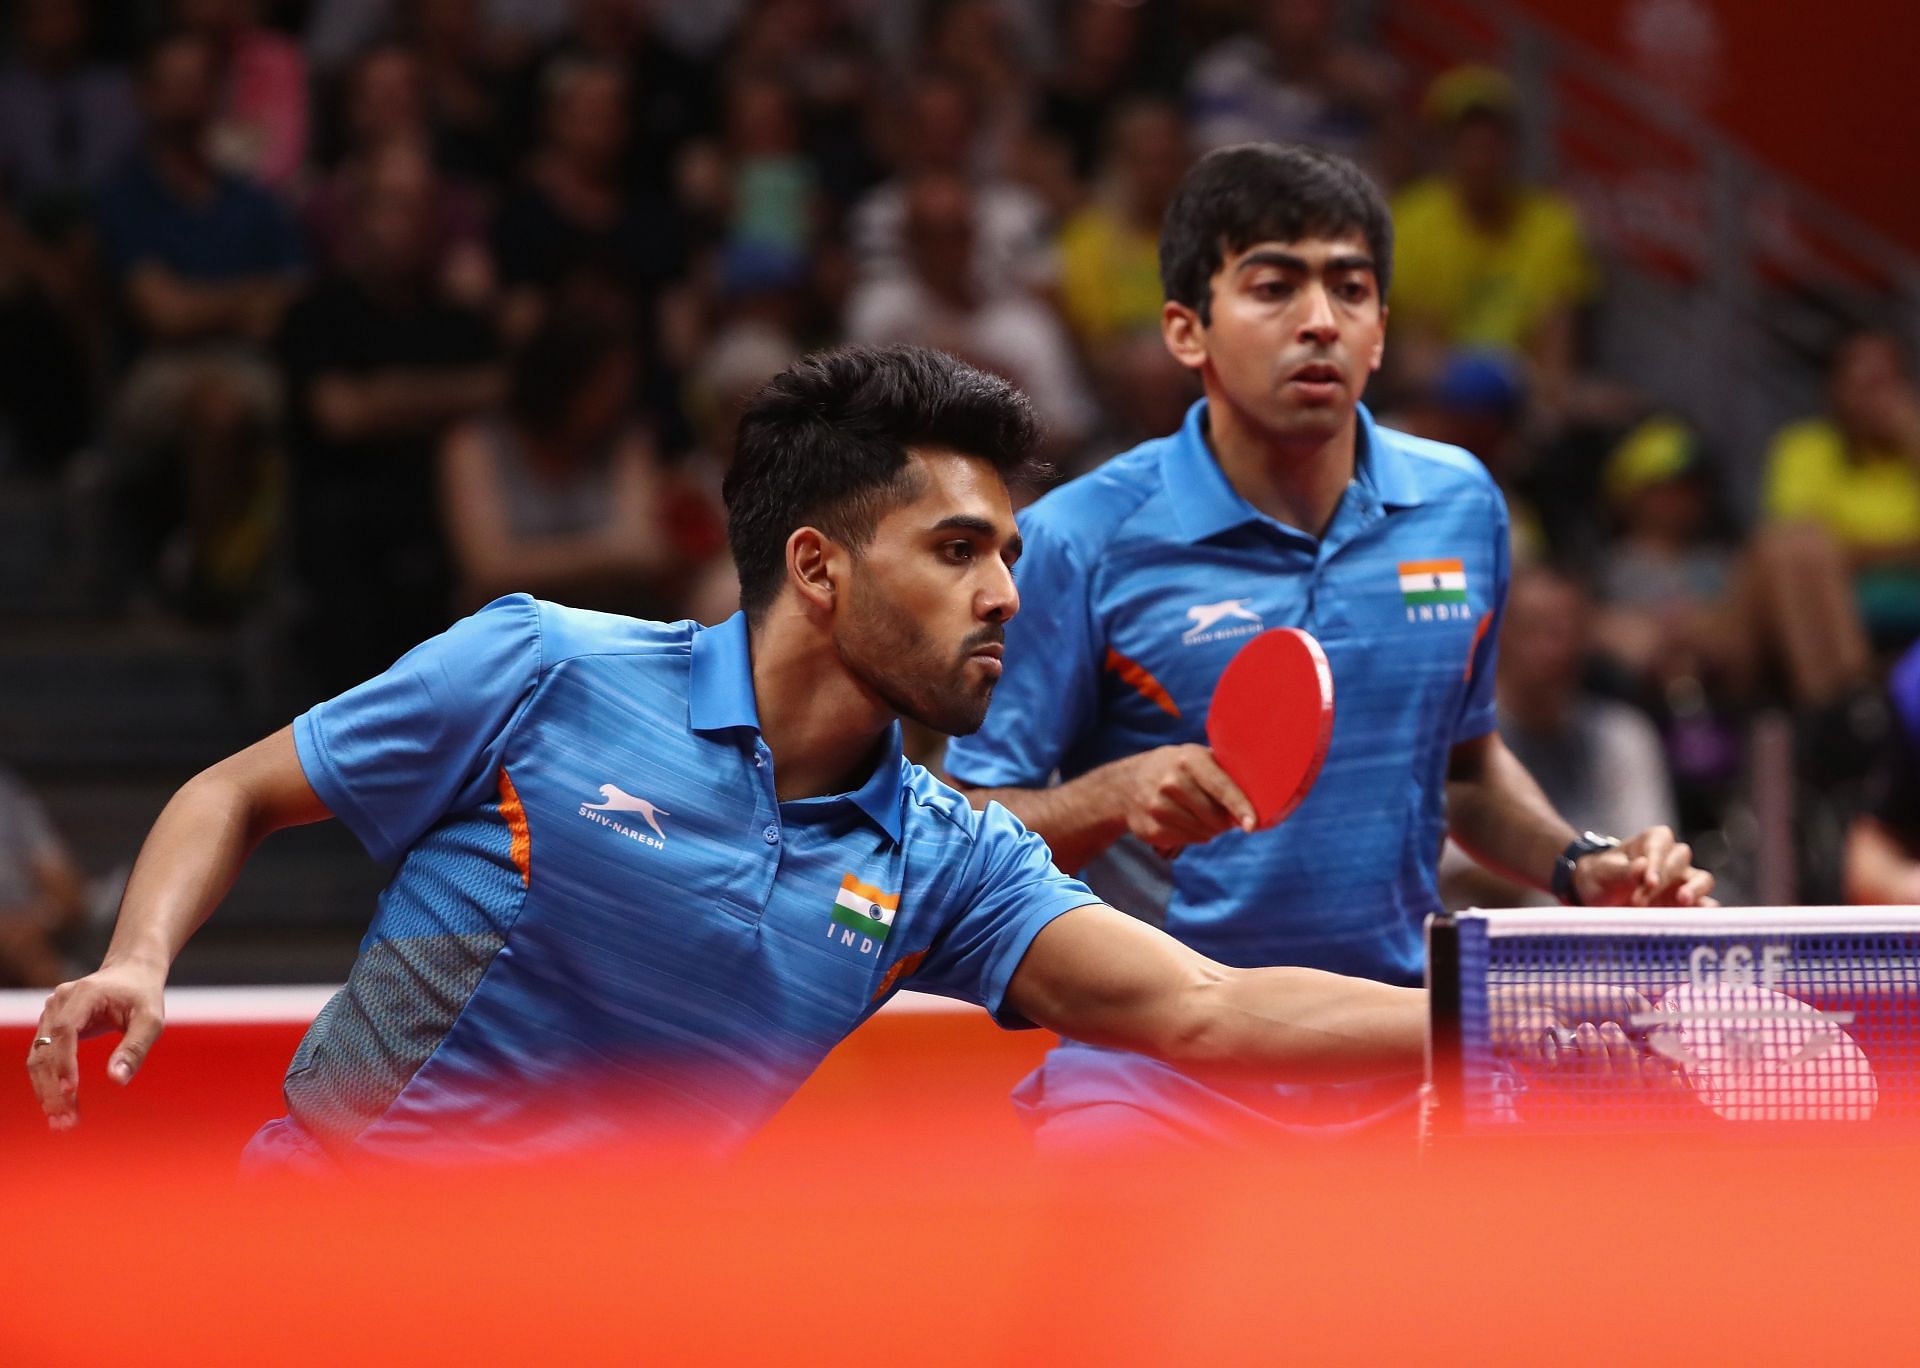 Stage set for National Ranking Table Tennis Championships